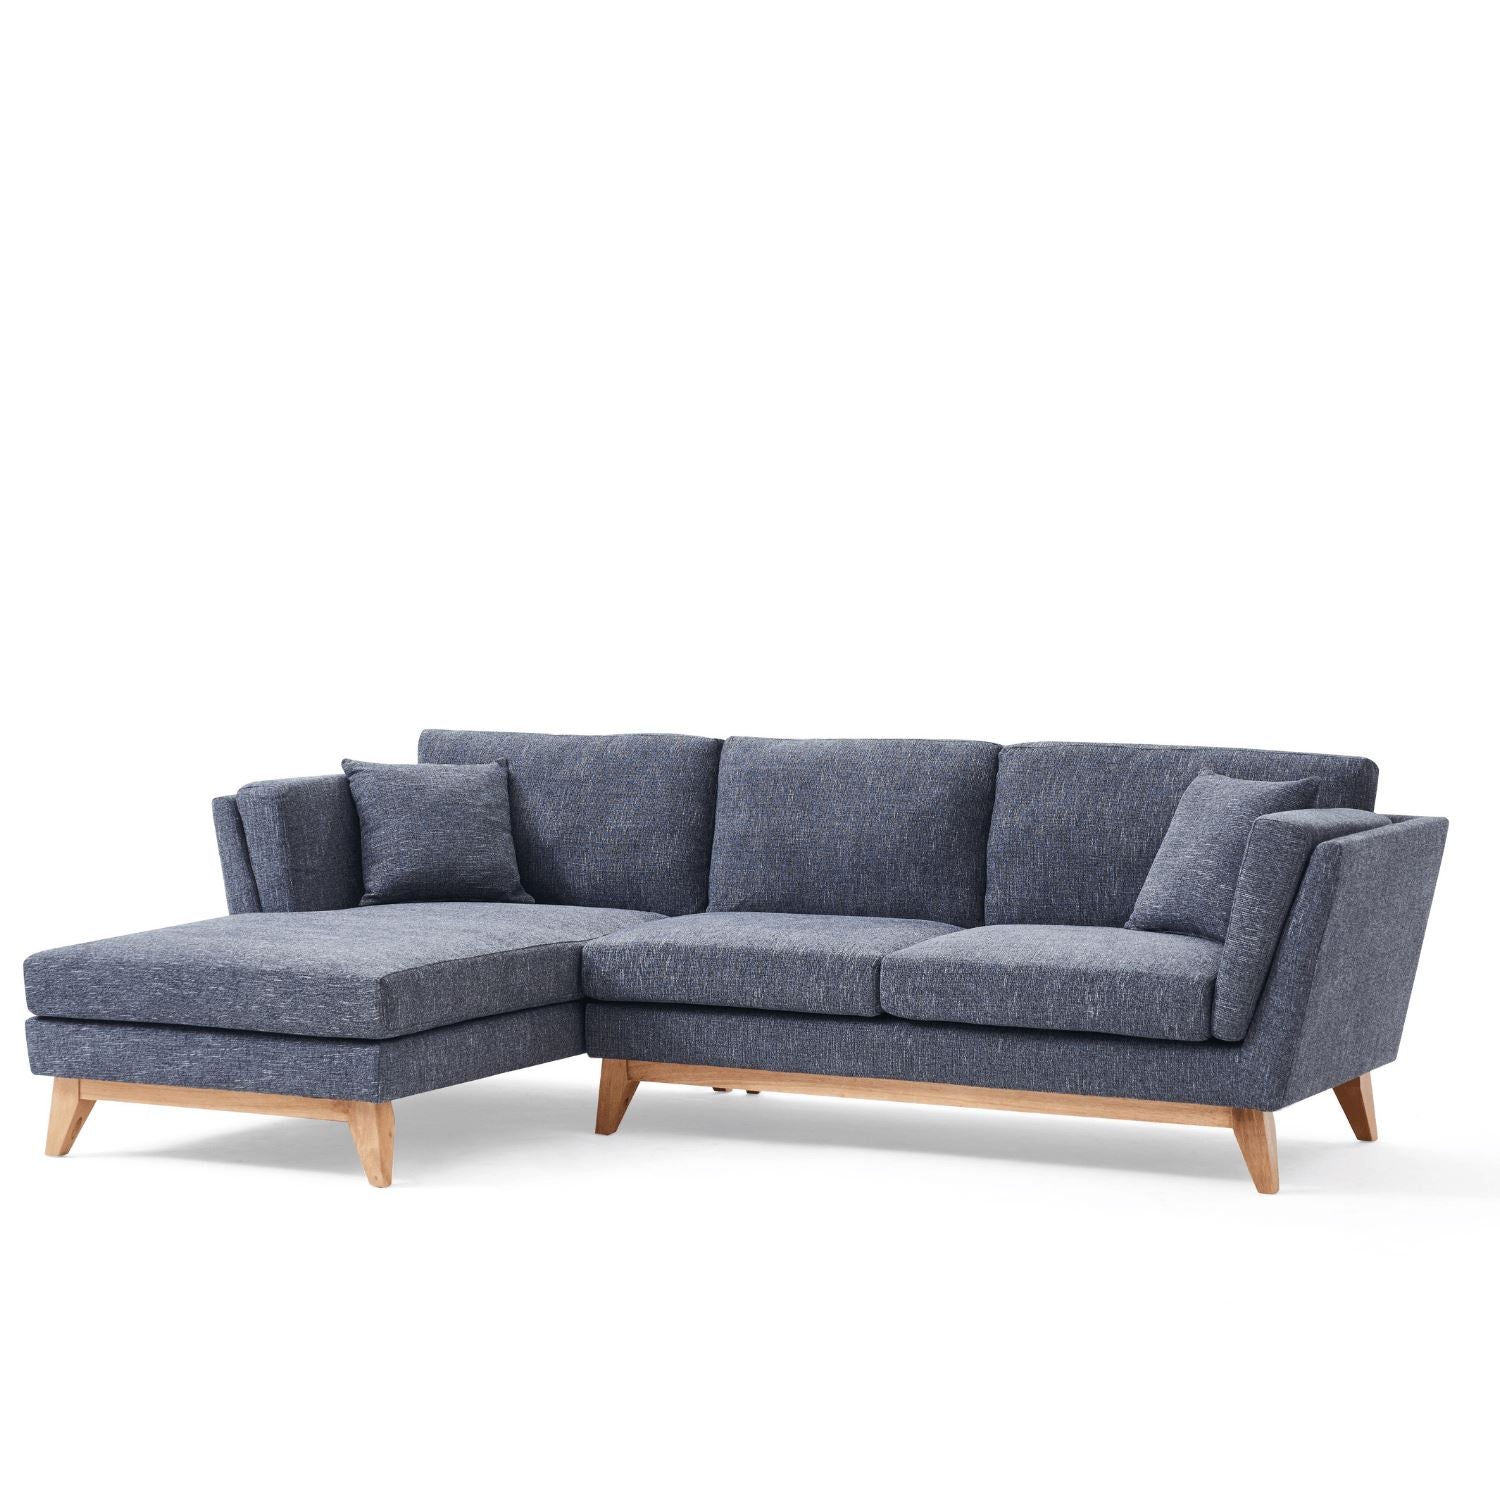 Furniture ValMinimal Sectional | Valyou